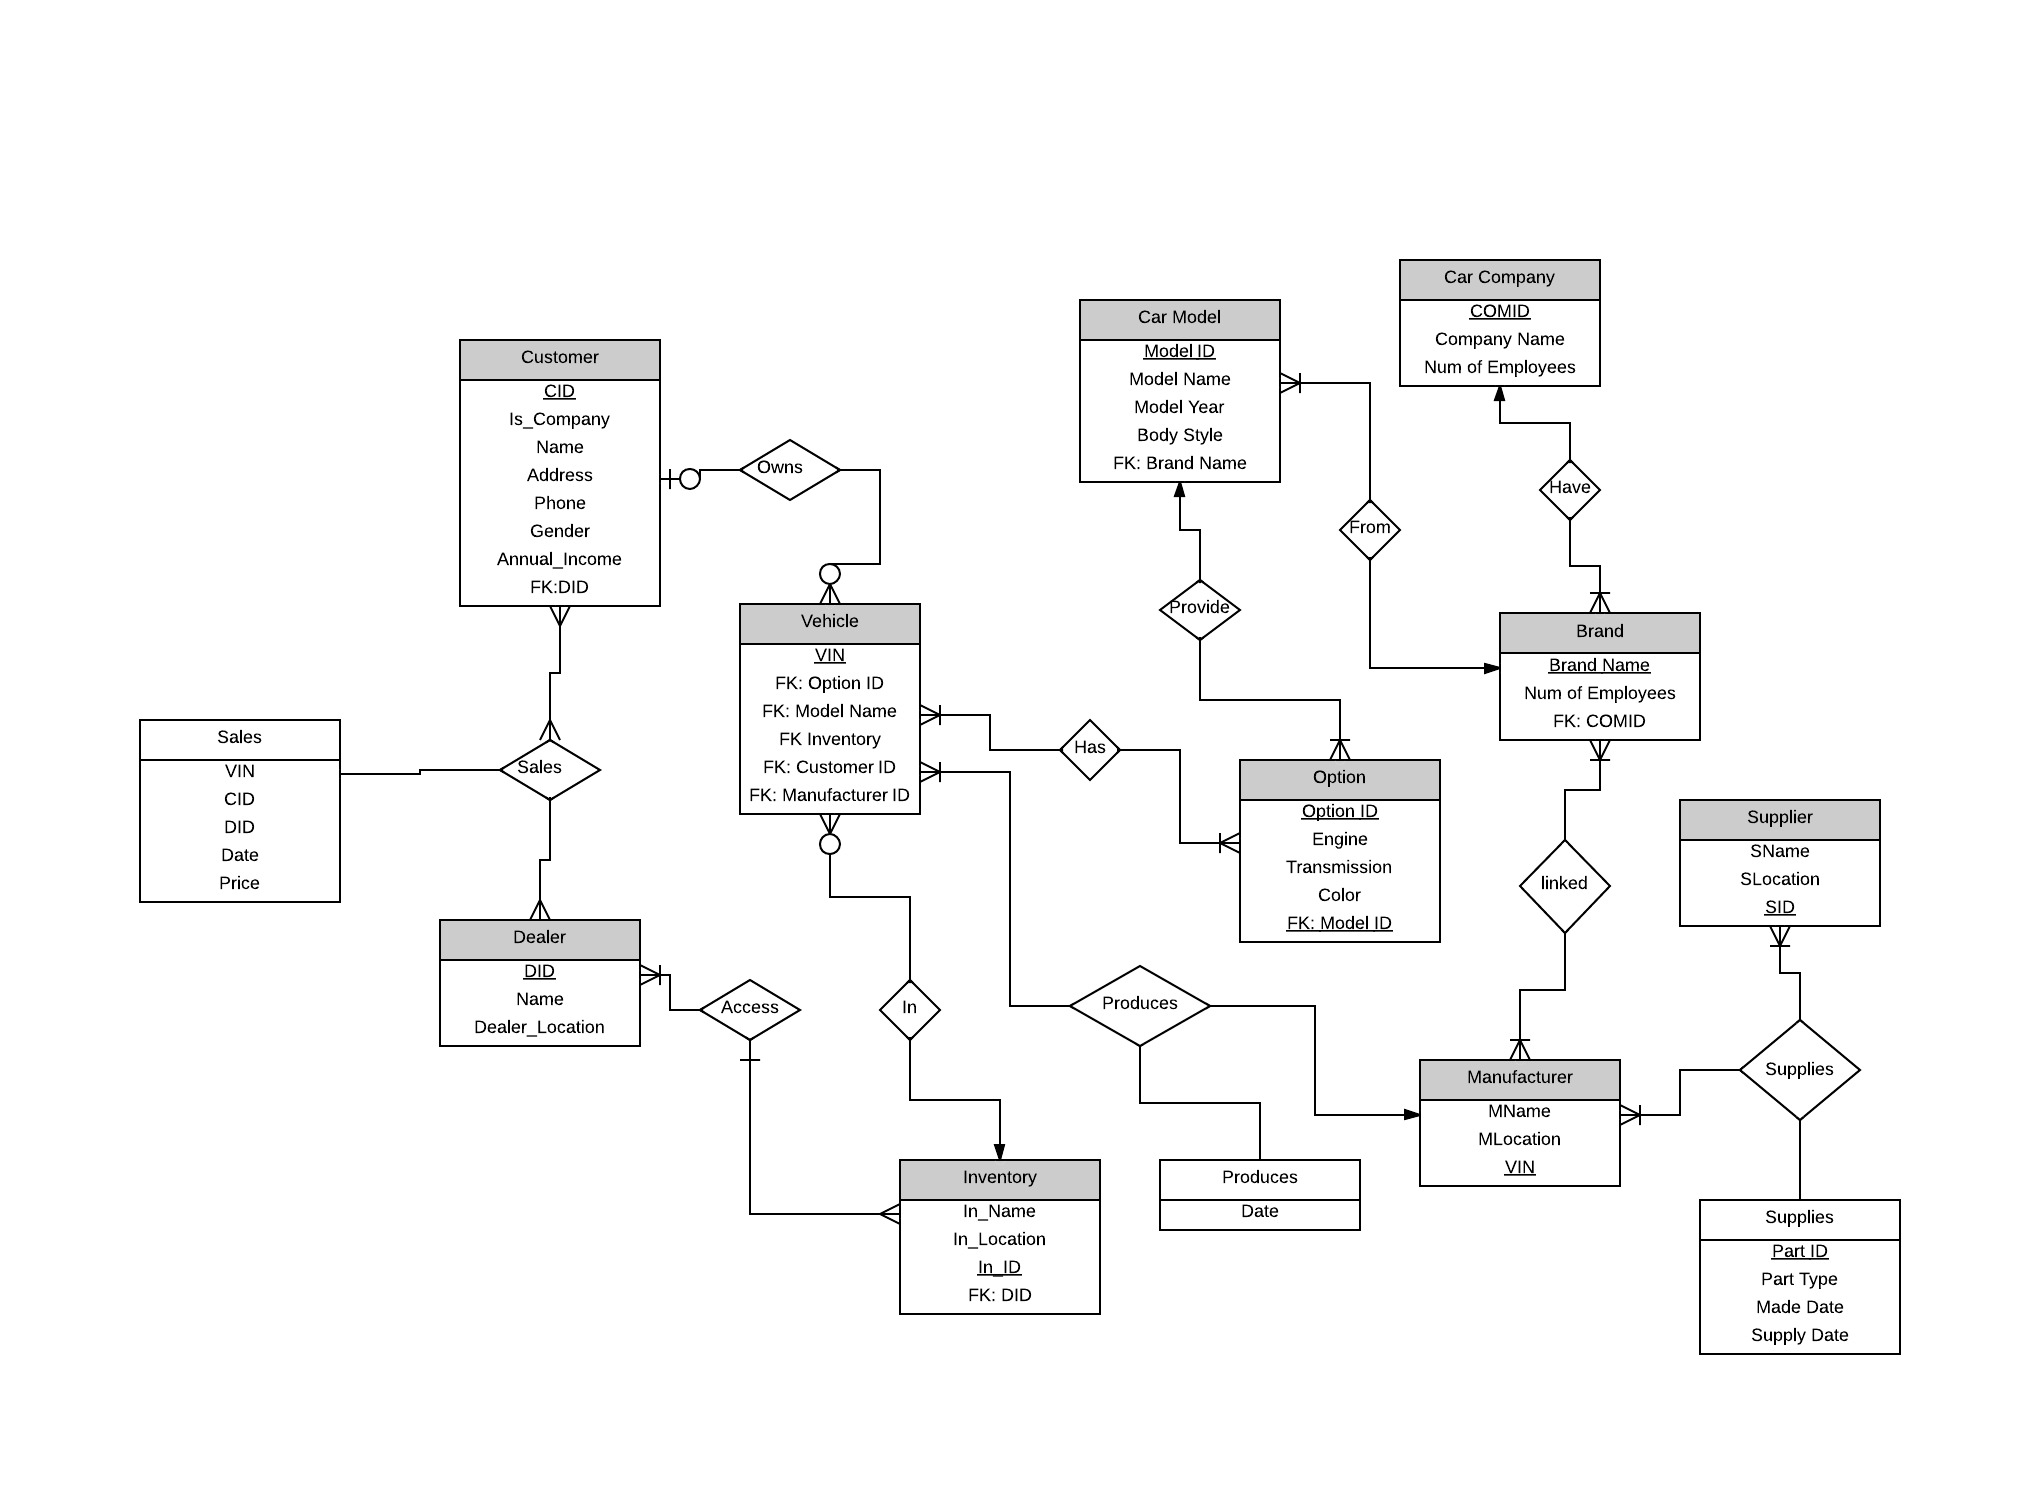 Sql Need Help On An ER Diagram For An Automobile Company 